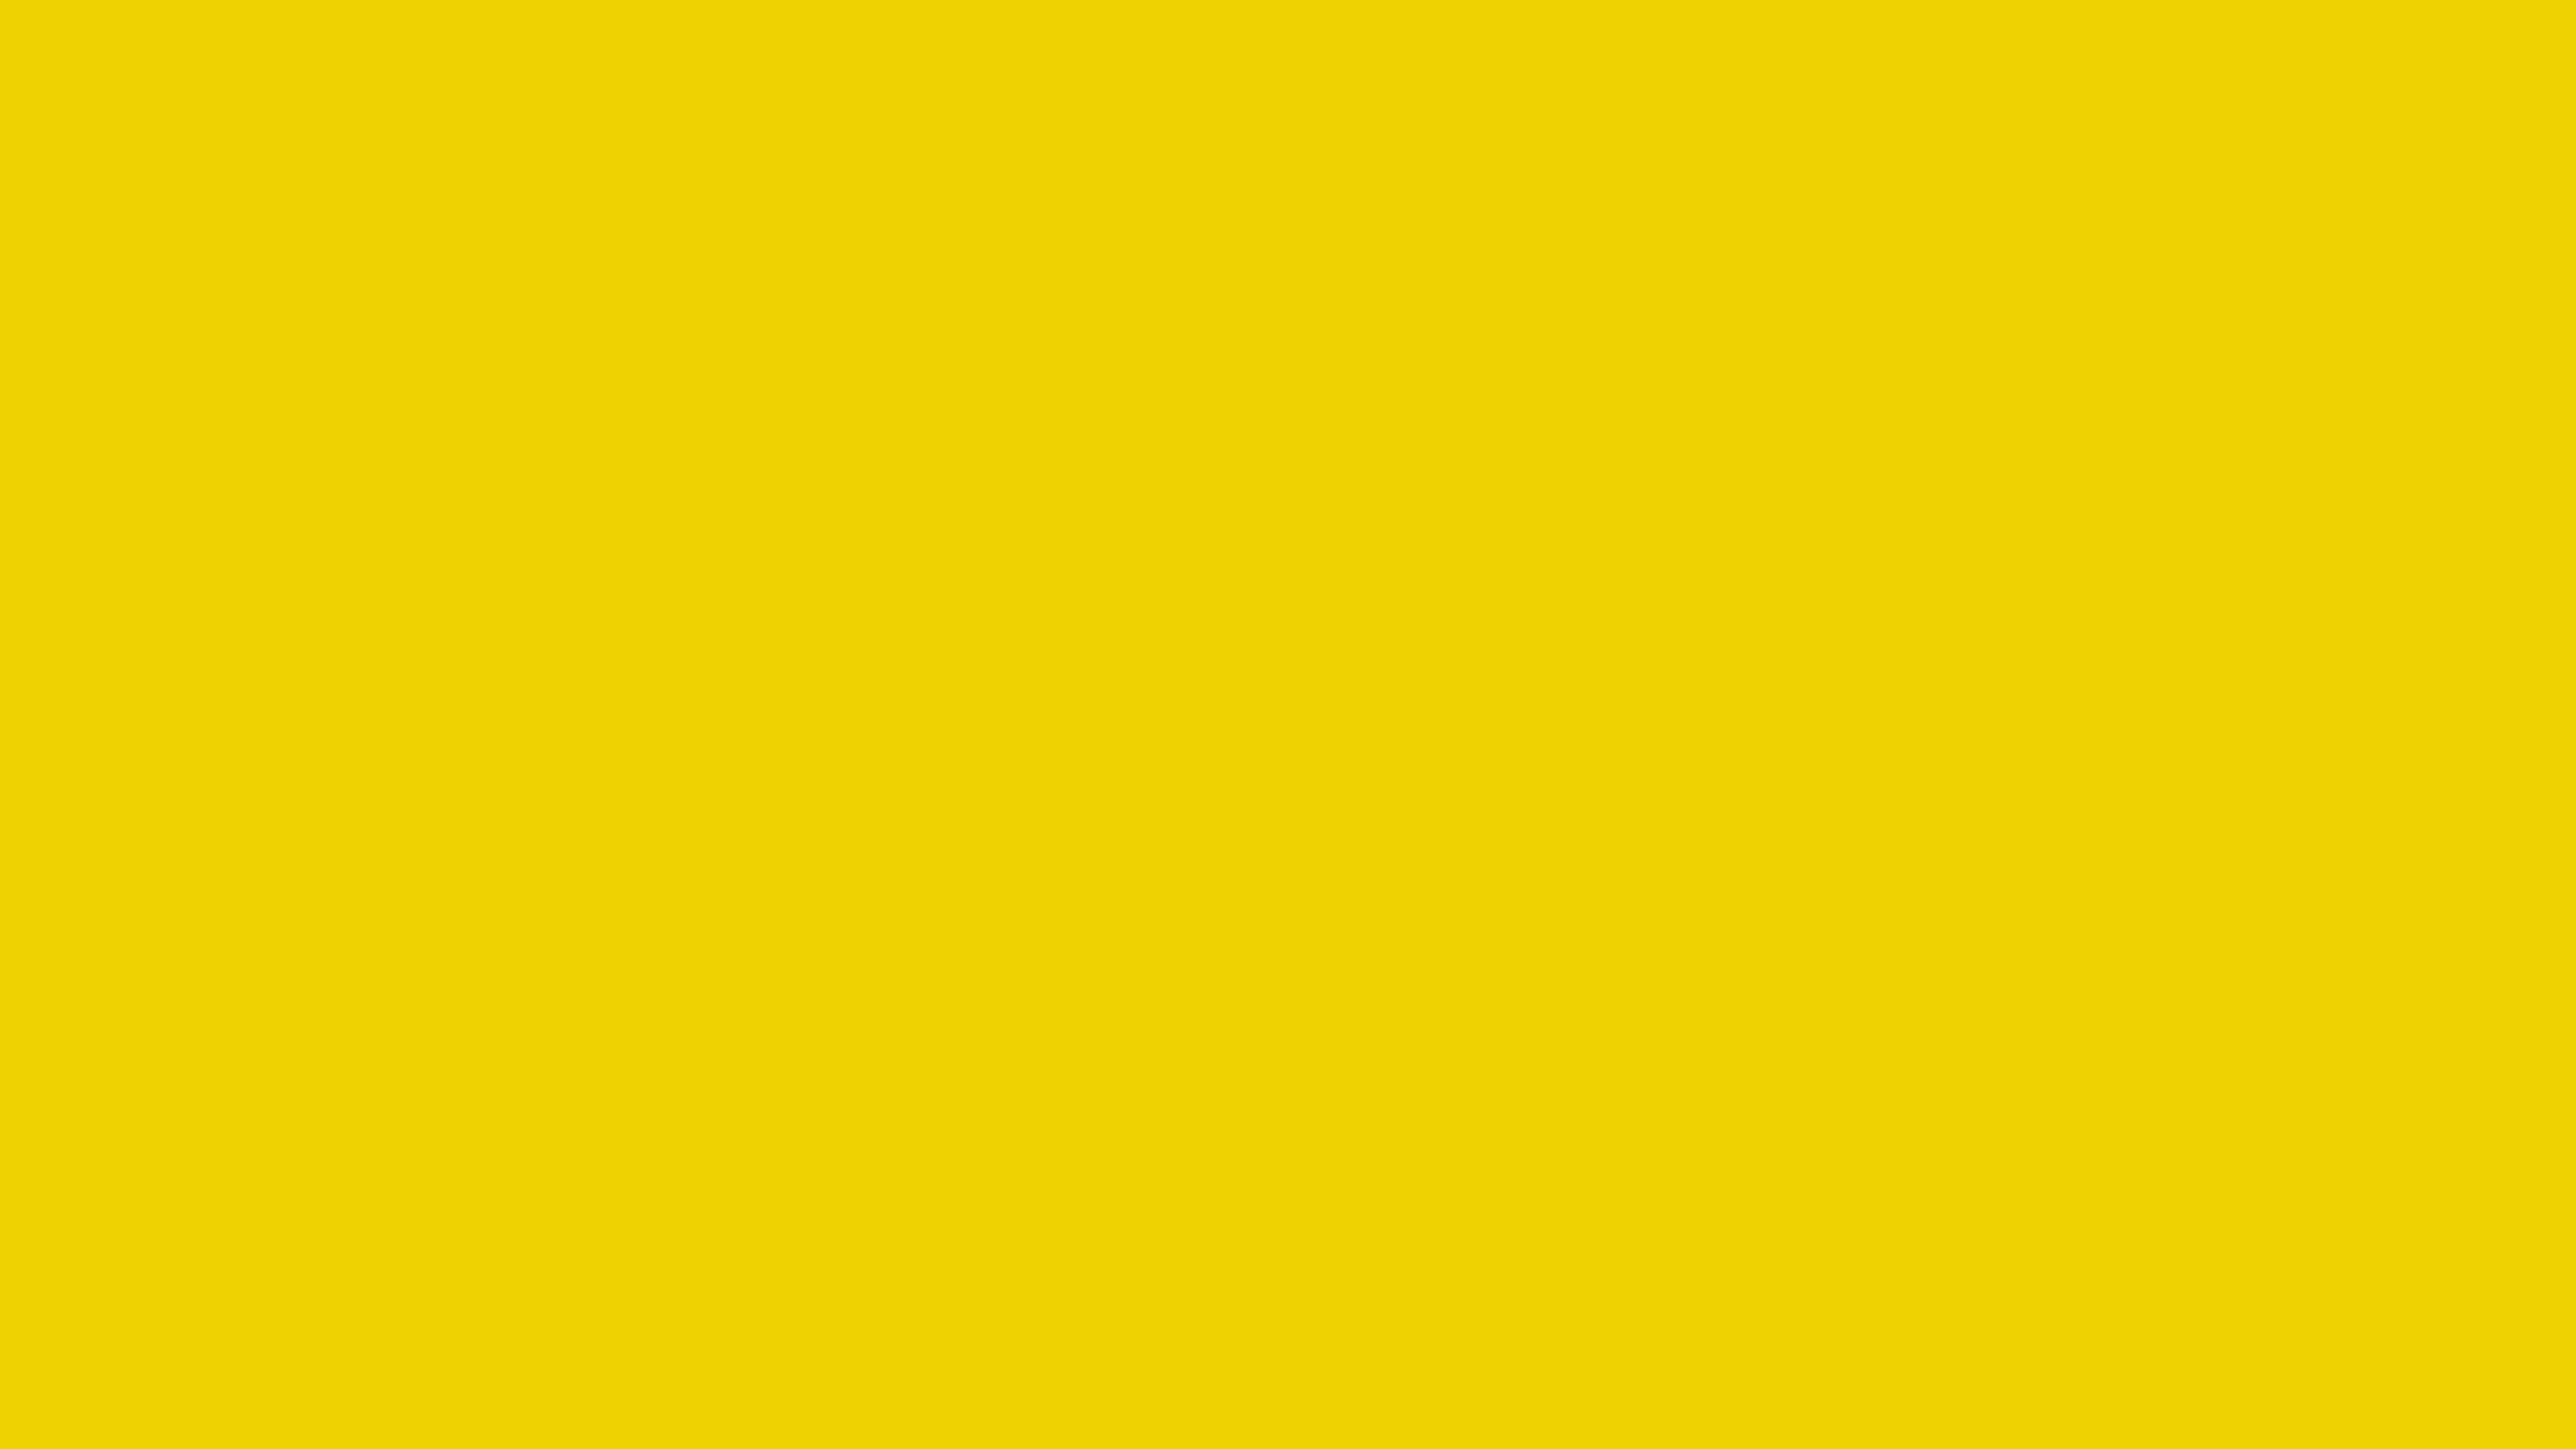 7680x4320 Safety Yellow Solid Color Background